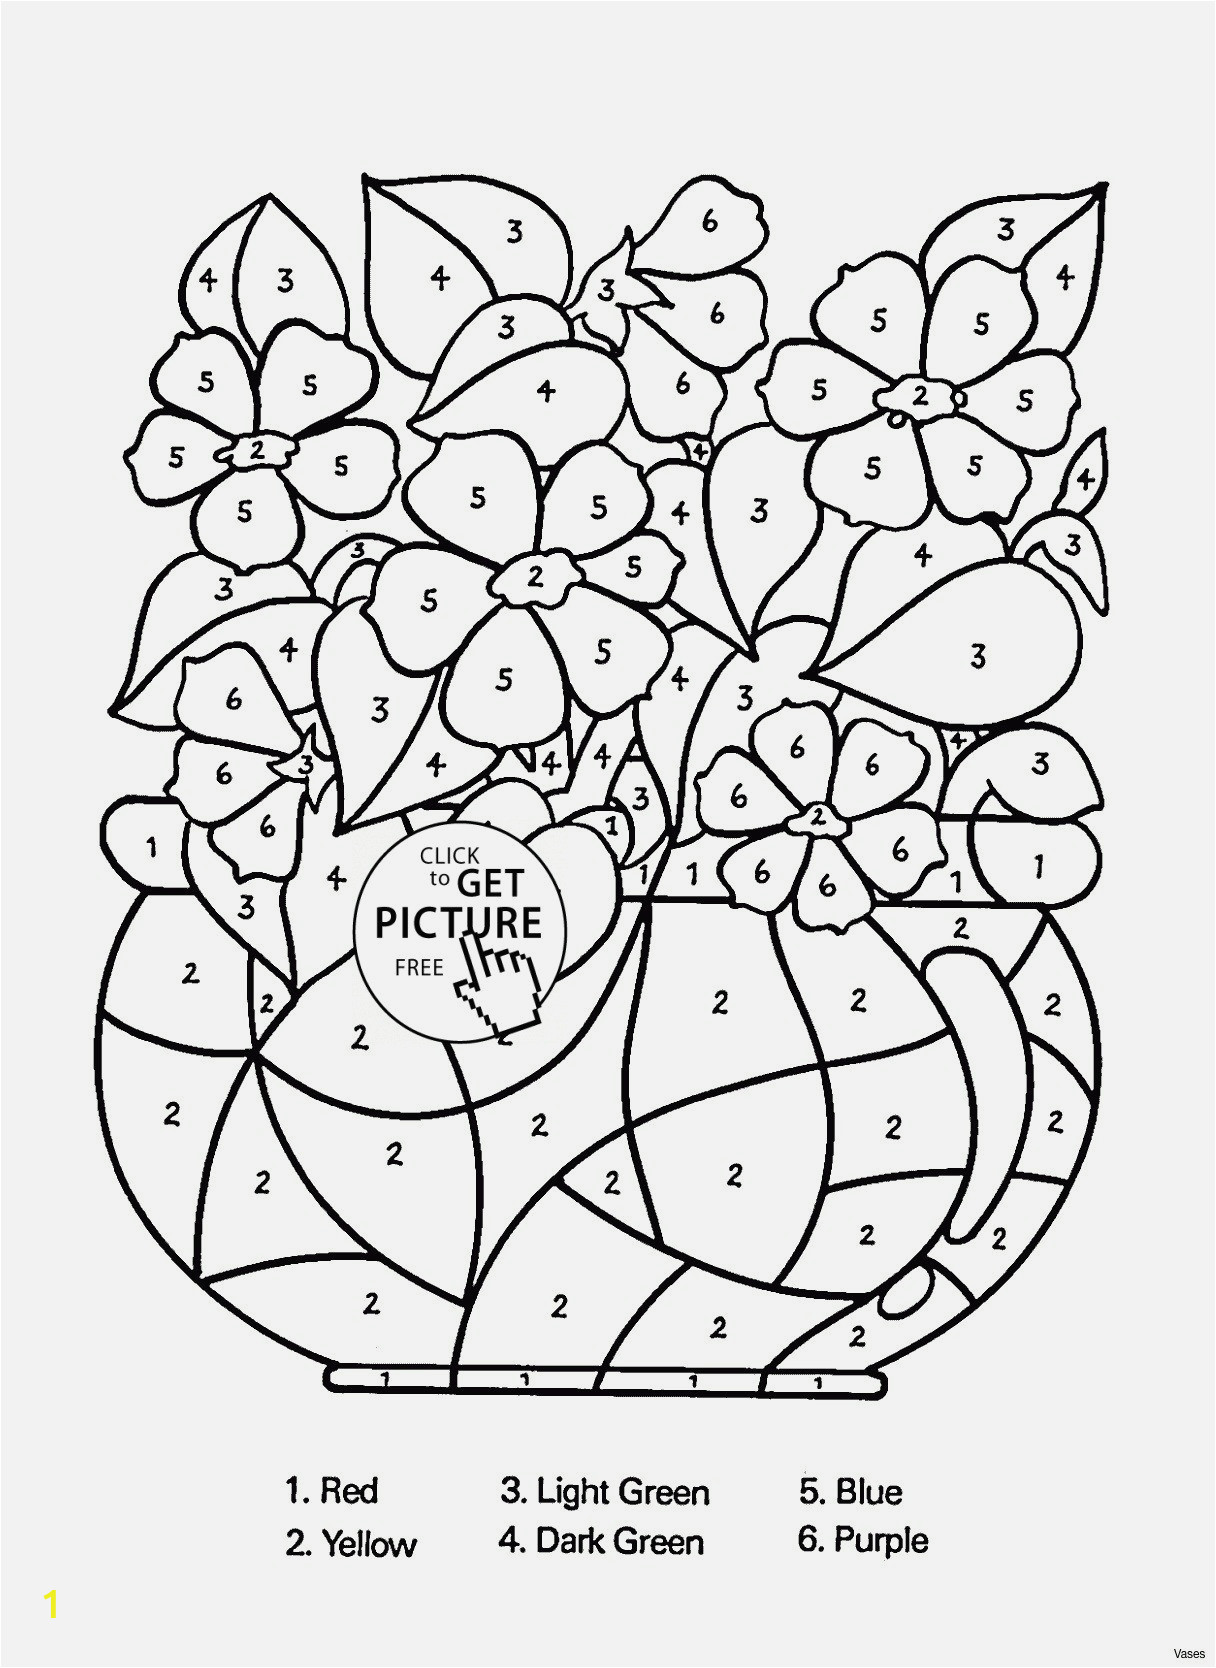 free birds coloring pages printable bird forers summer adultserest pictures awesome for colouring season theme beach fun sheets pdf kids toddlers